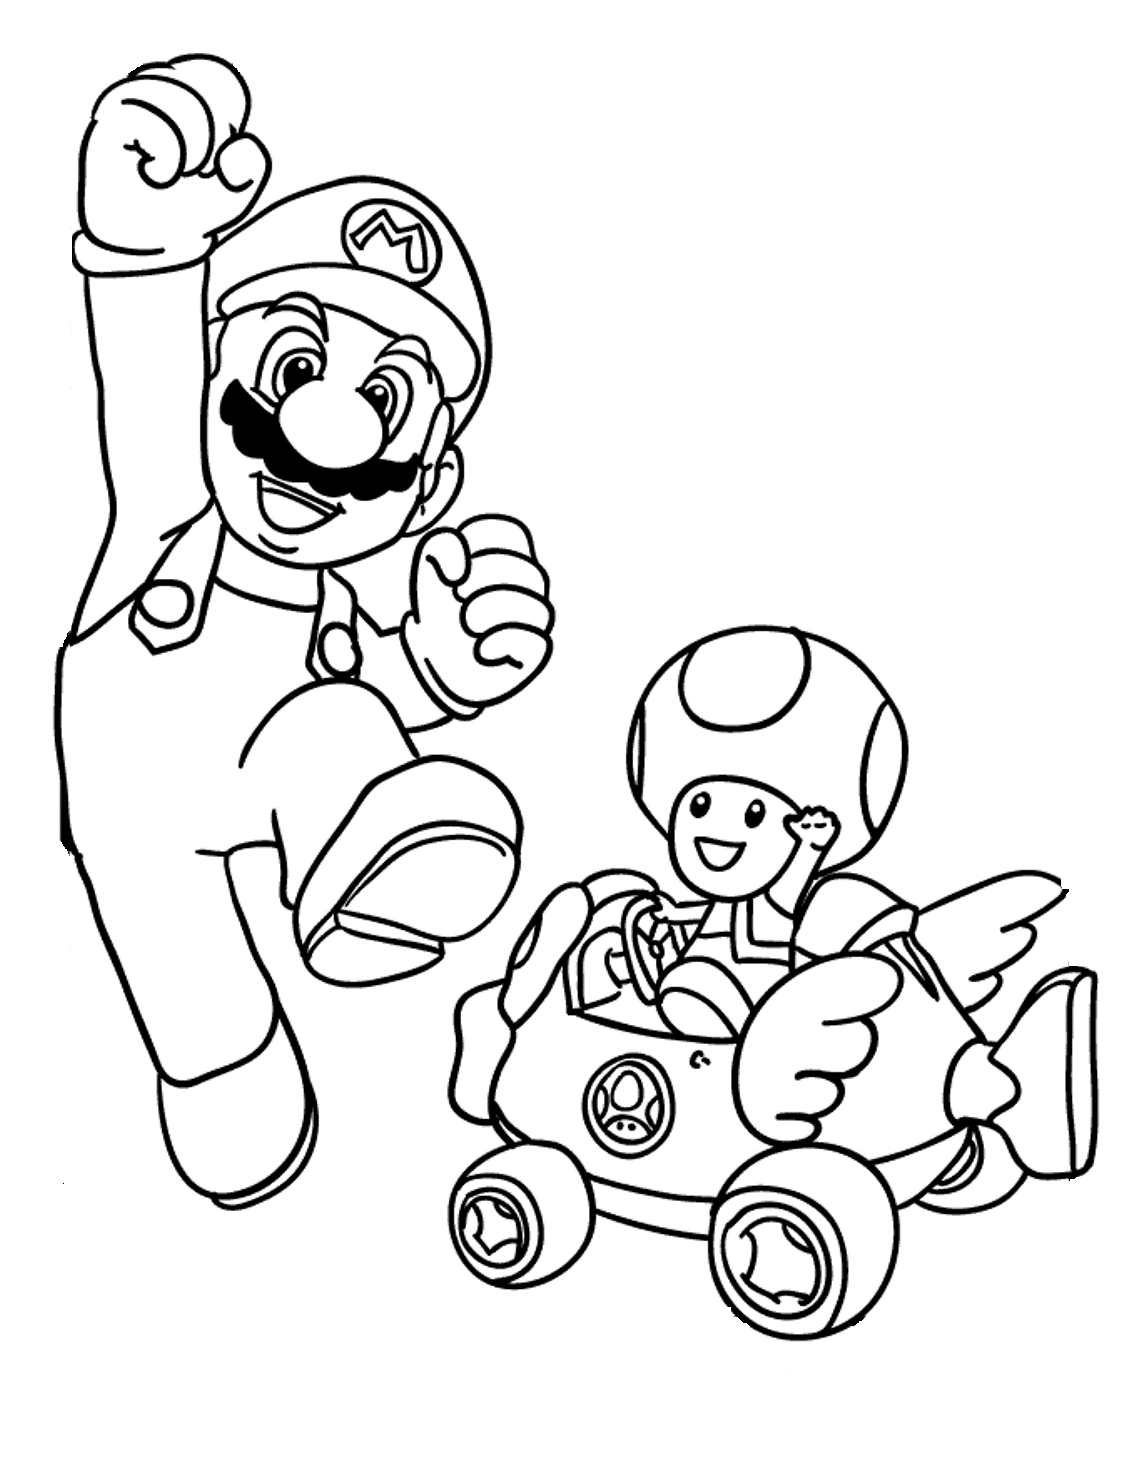 Mario Brothers - Coloring Pages for Kids and for Adults